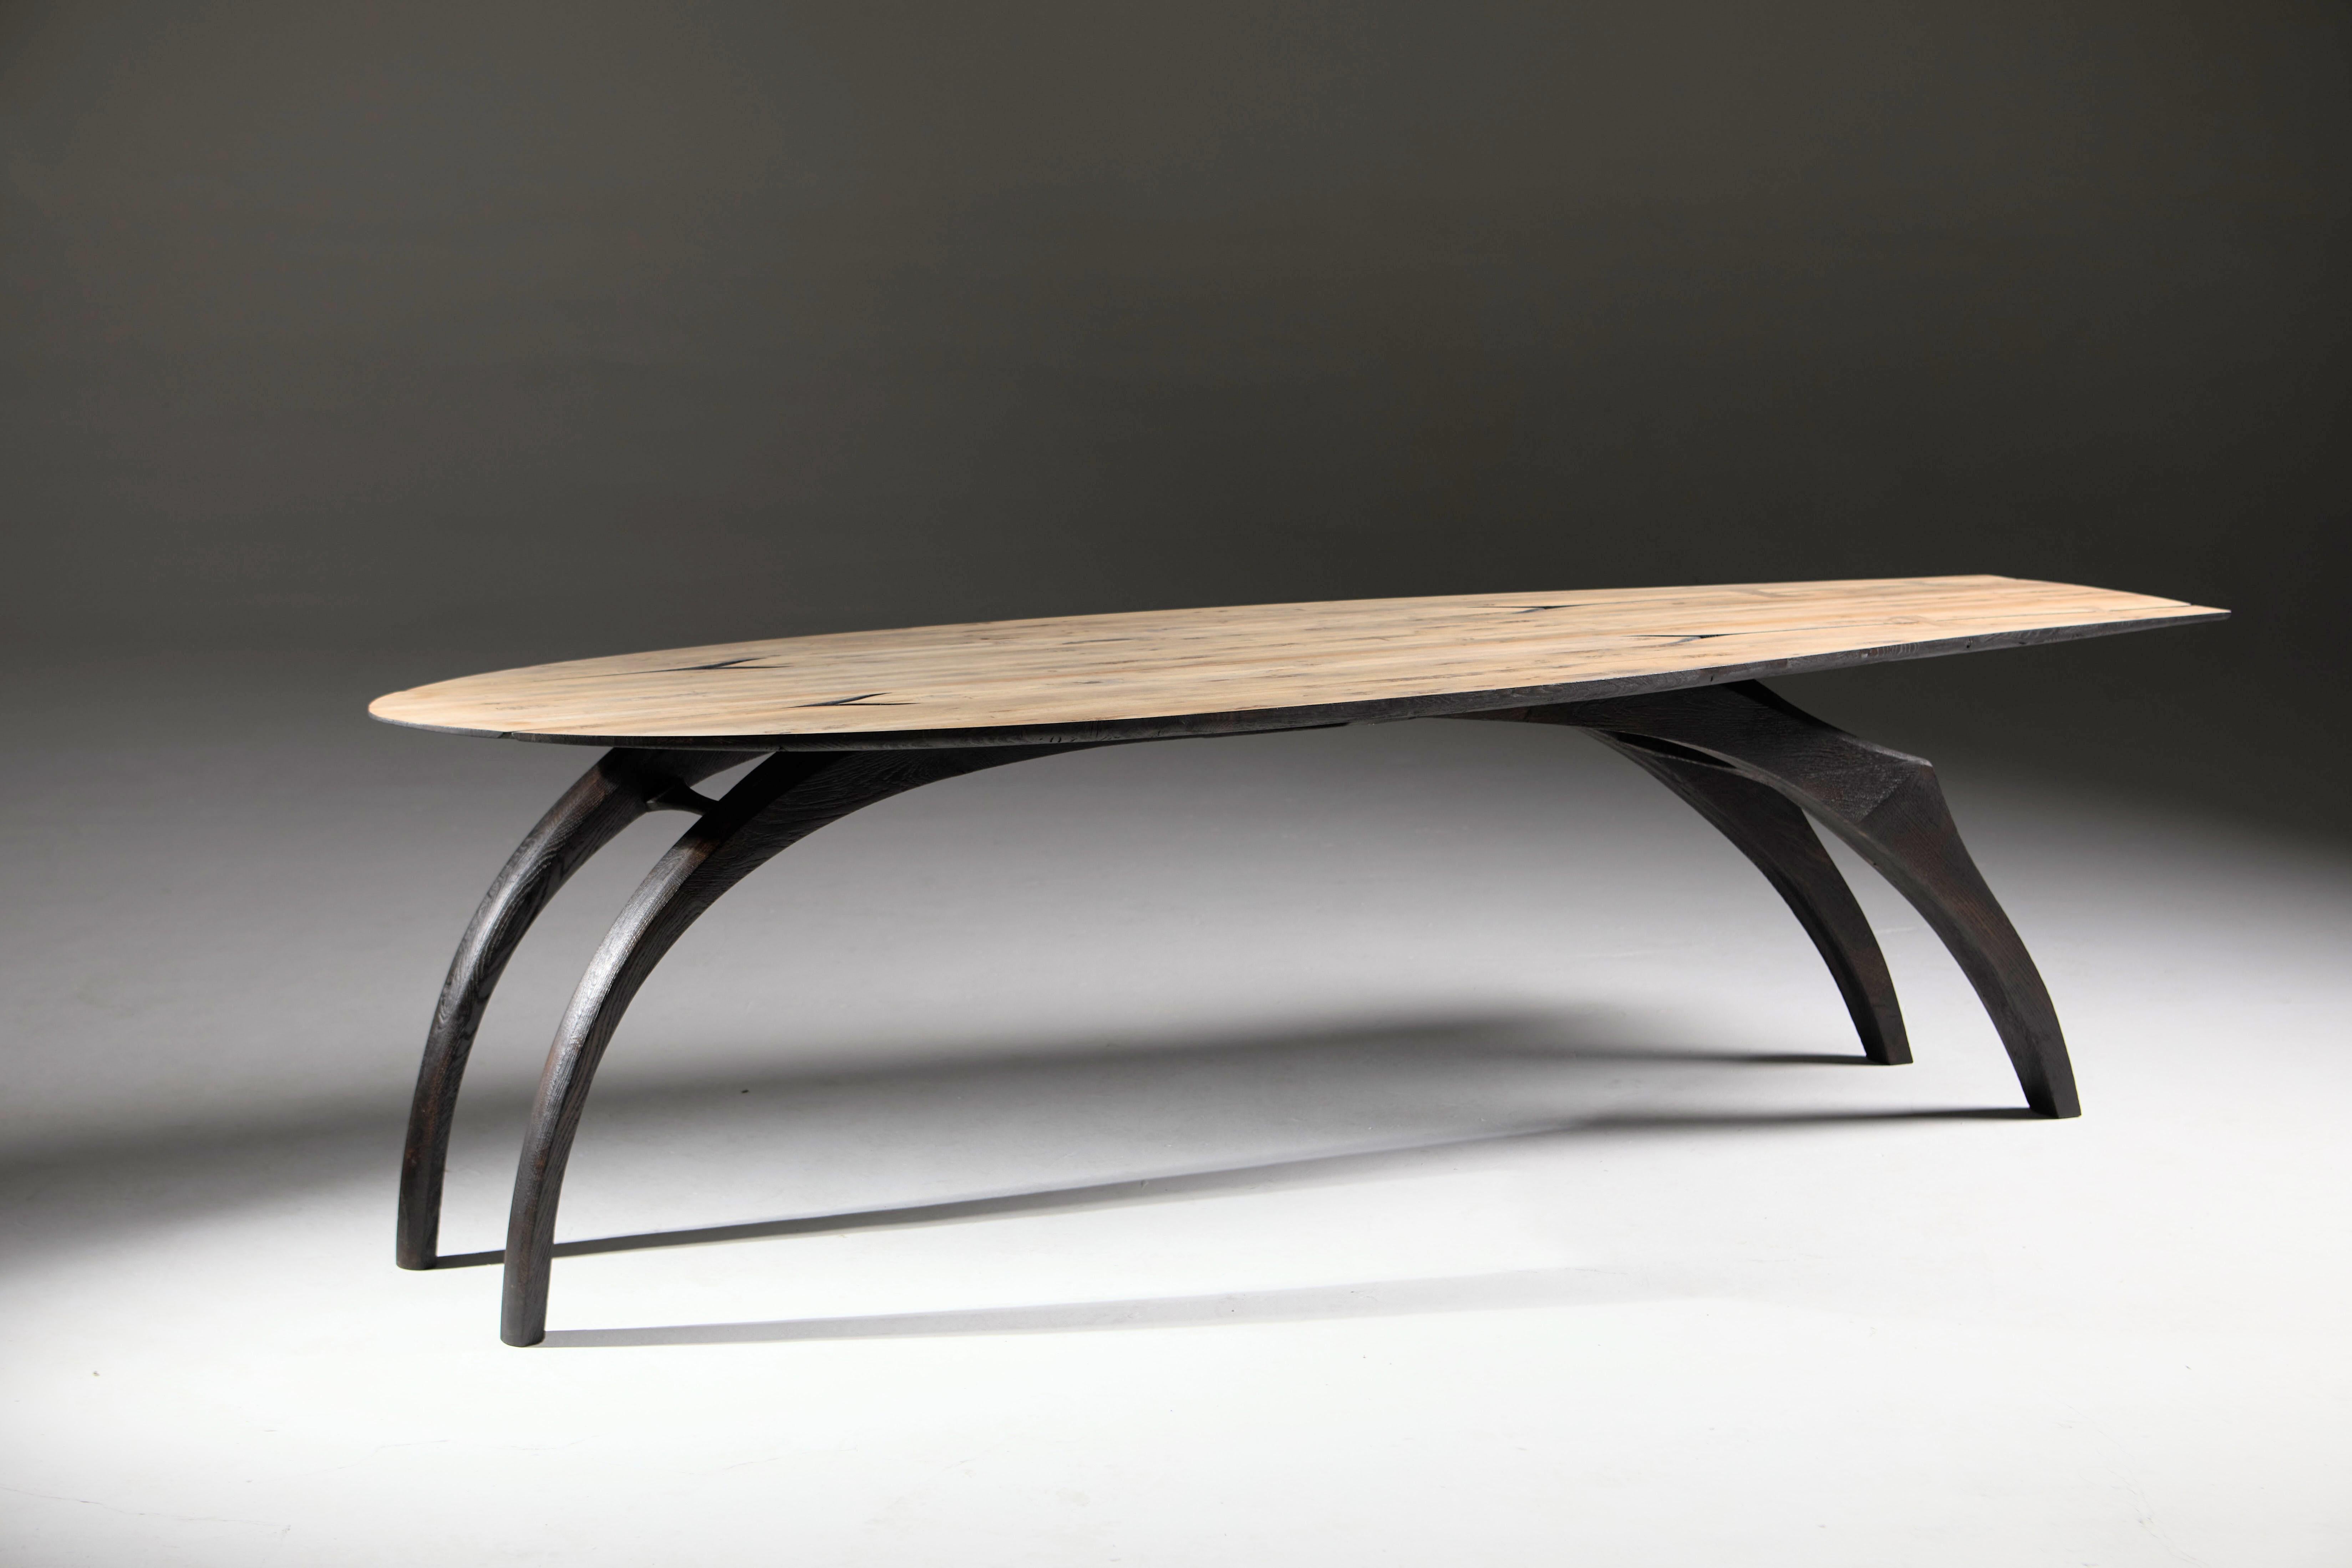 The Leap table:
I wanted to create a table that suggested the fluid figure of an animal in motion.
– Made from solid pippy English oak.
– The legs are flame-scorched and brushed to enhance the grain.
– The legs and underside of the tabletop are